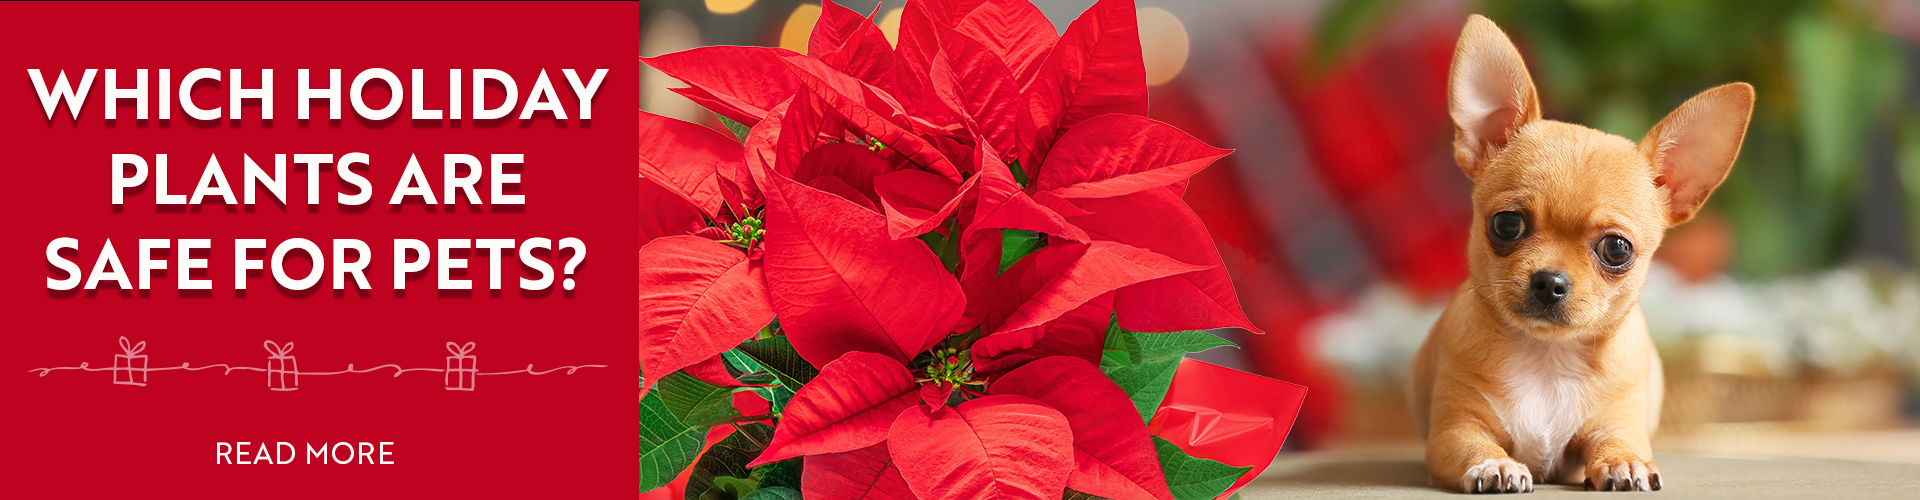 Which Holiday Plants are Safe For Pets • READ MORE